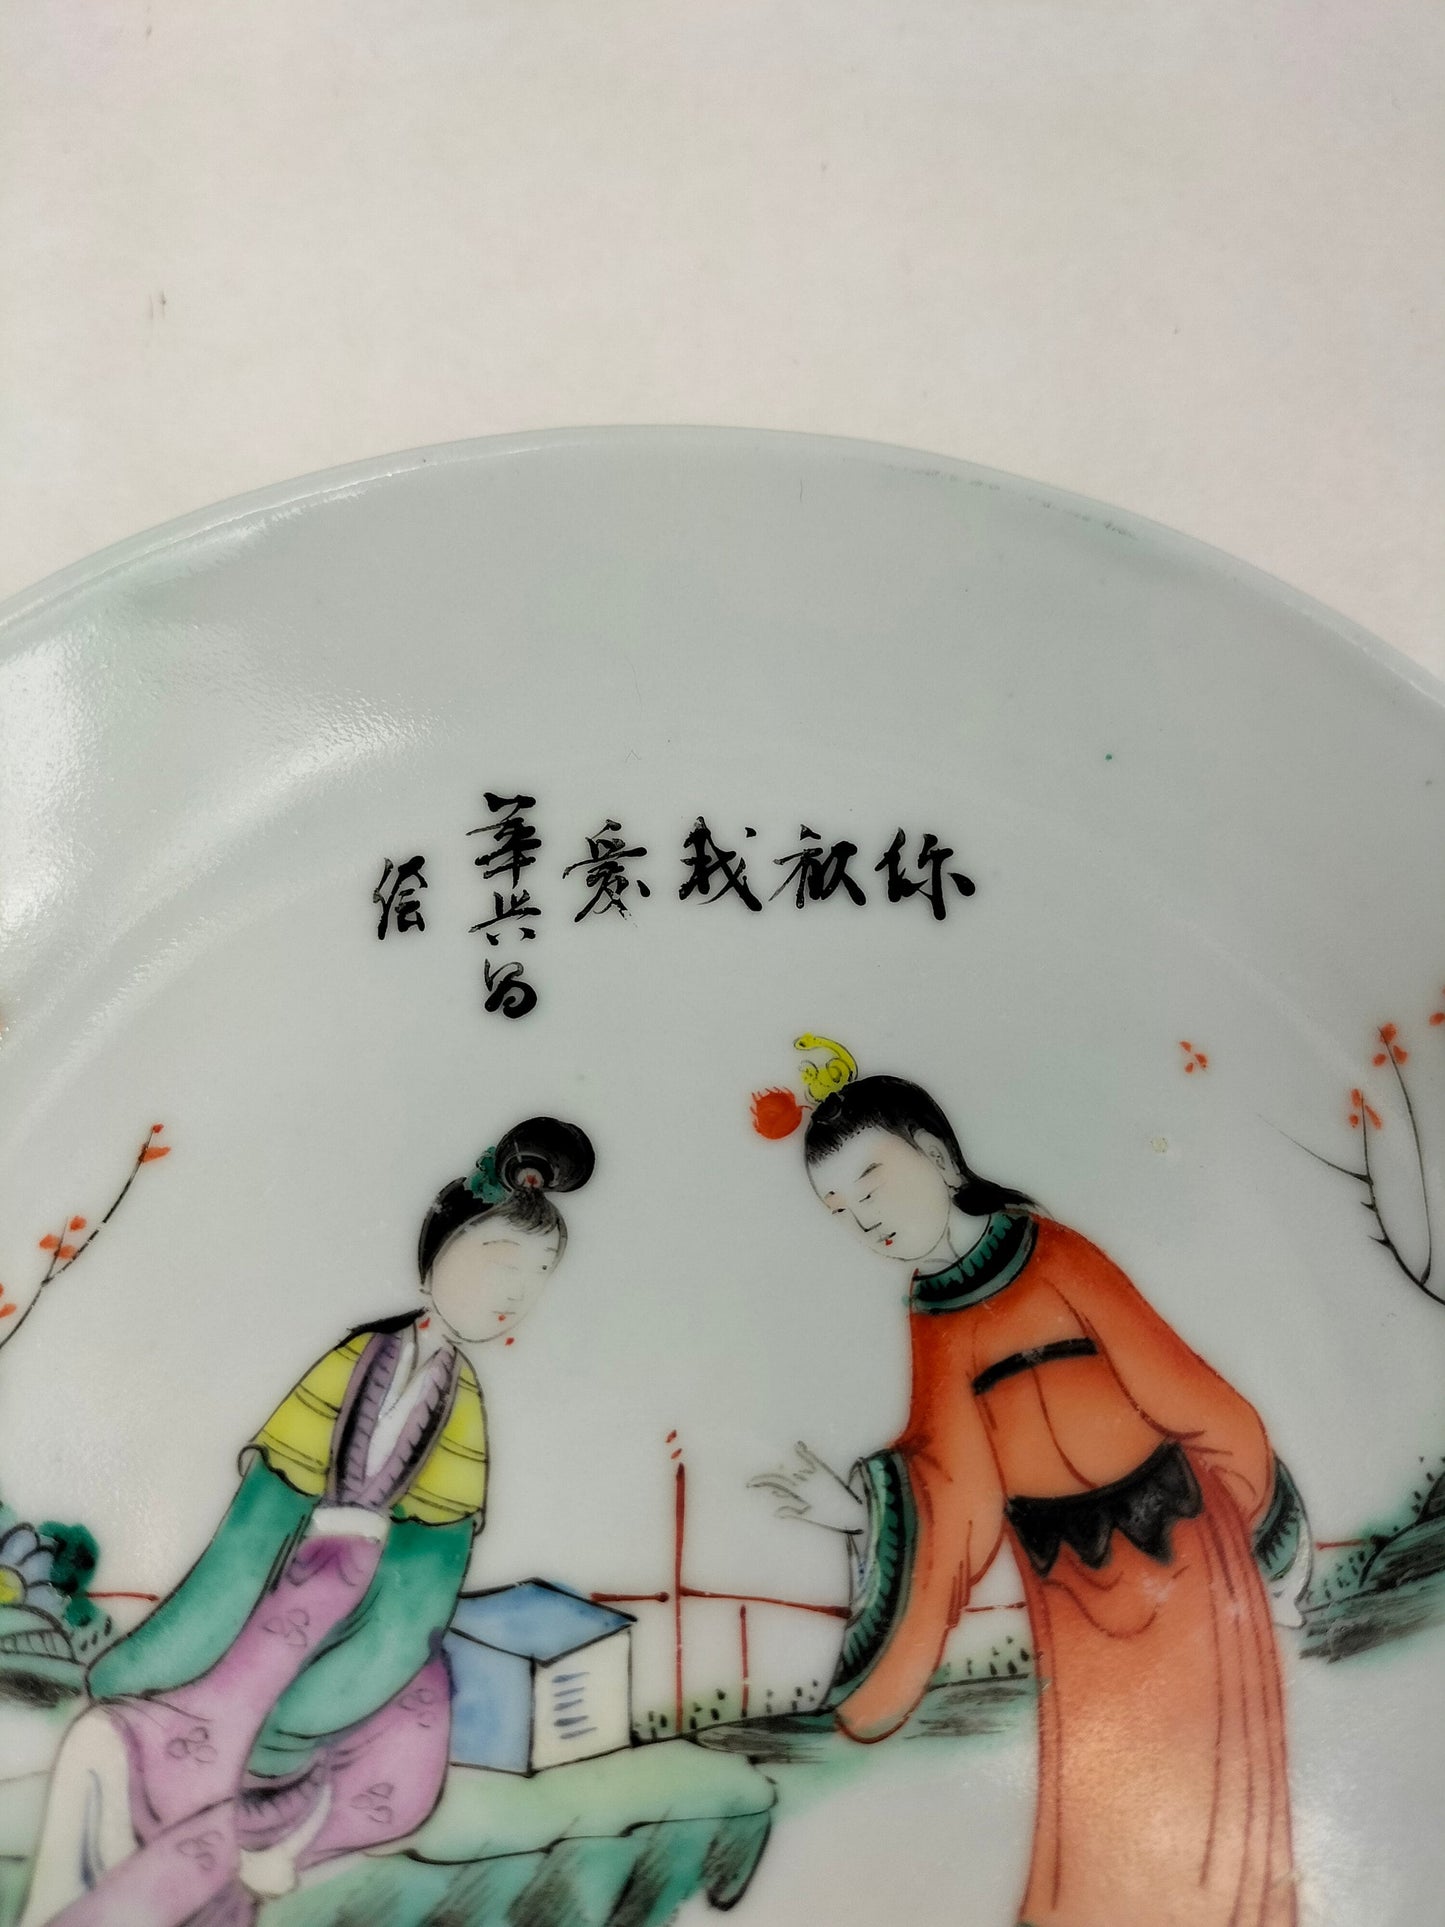 Antique Chinese plate decorated with a garden scene // Republic Period (1912-1949)